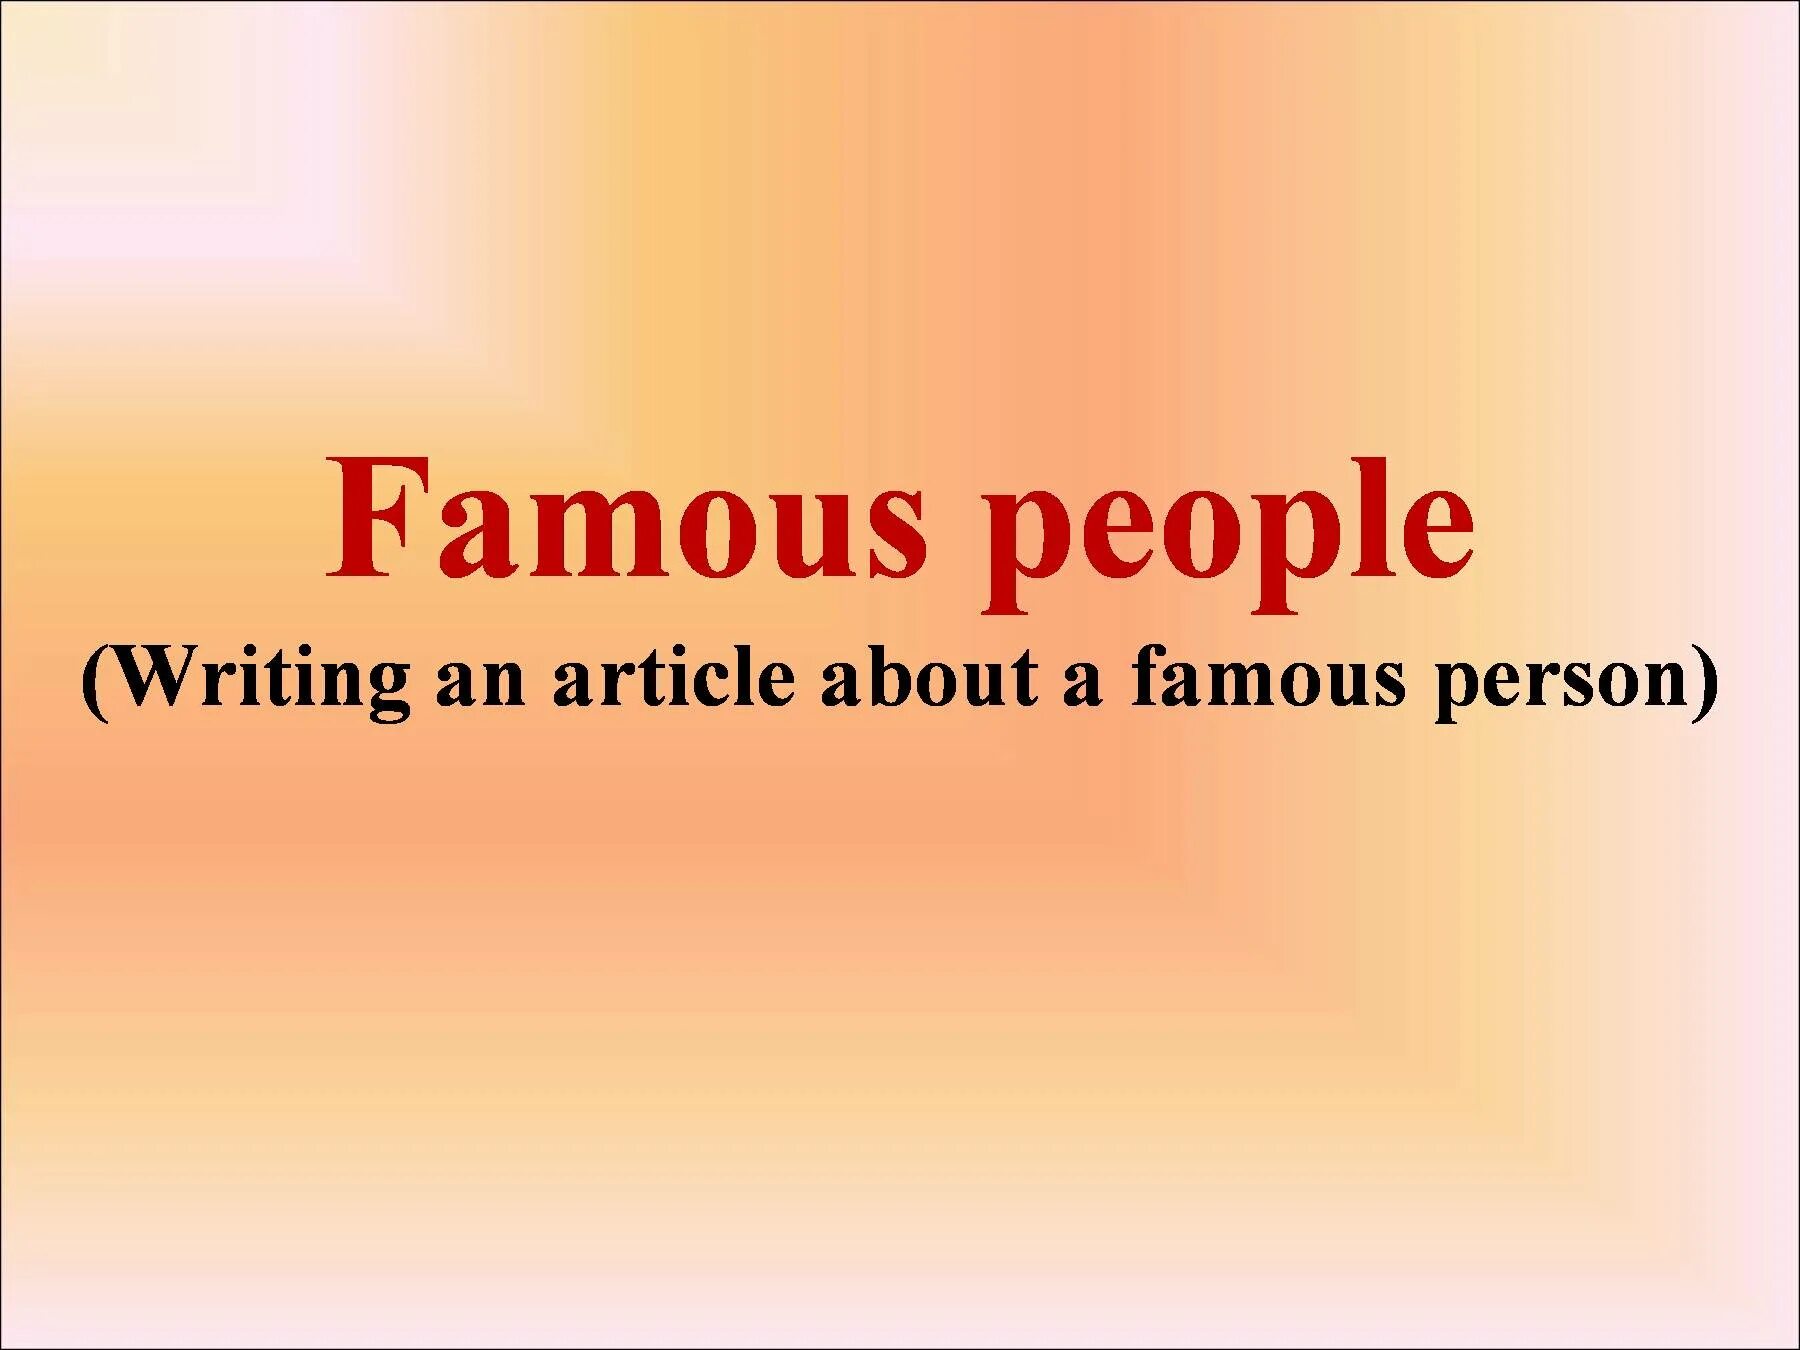 Famous people of great britain. Famous people презентация. Famous people презентация 6 класс. Проект a famous person. An article about famous person.